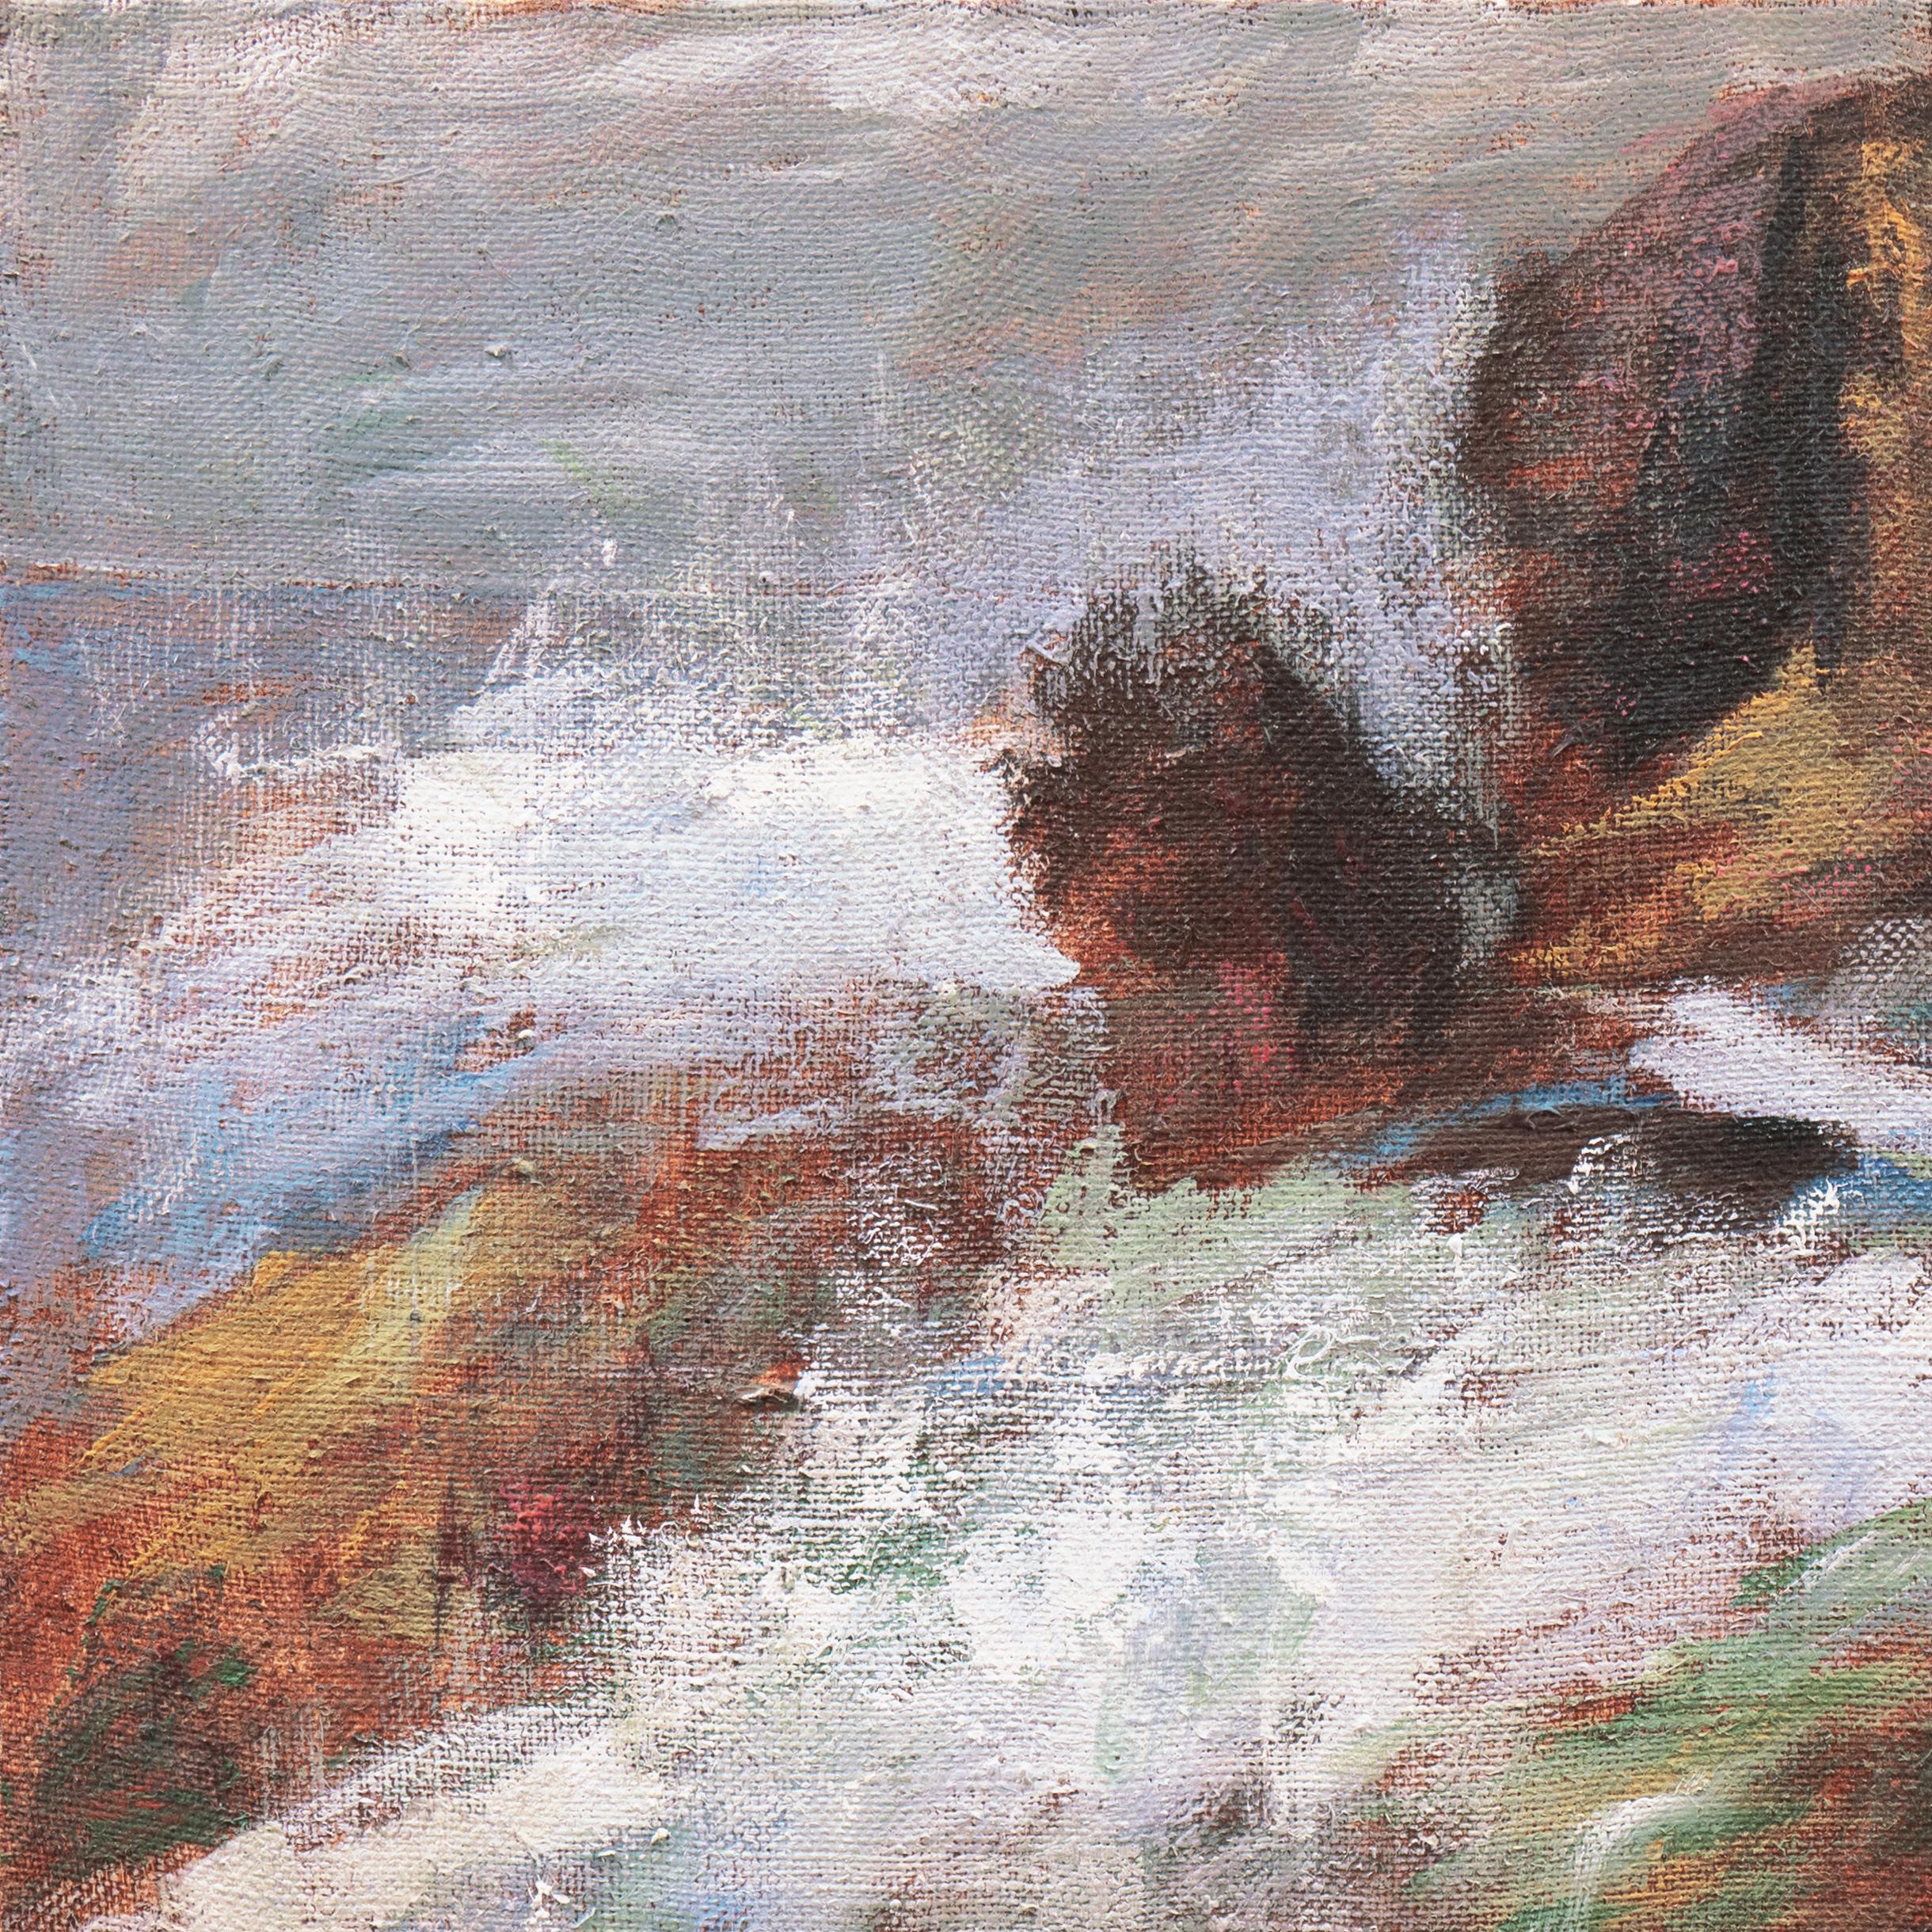 A substantial, semi-abstract, oil seascape showing a view of a tidepool and surf pounding on coastal rocks. 

Signed lower left, 'B. Polach' for Barbara Polach (American, d.2009), a California Bay Area artist, and painted circa 1965; additionally